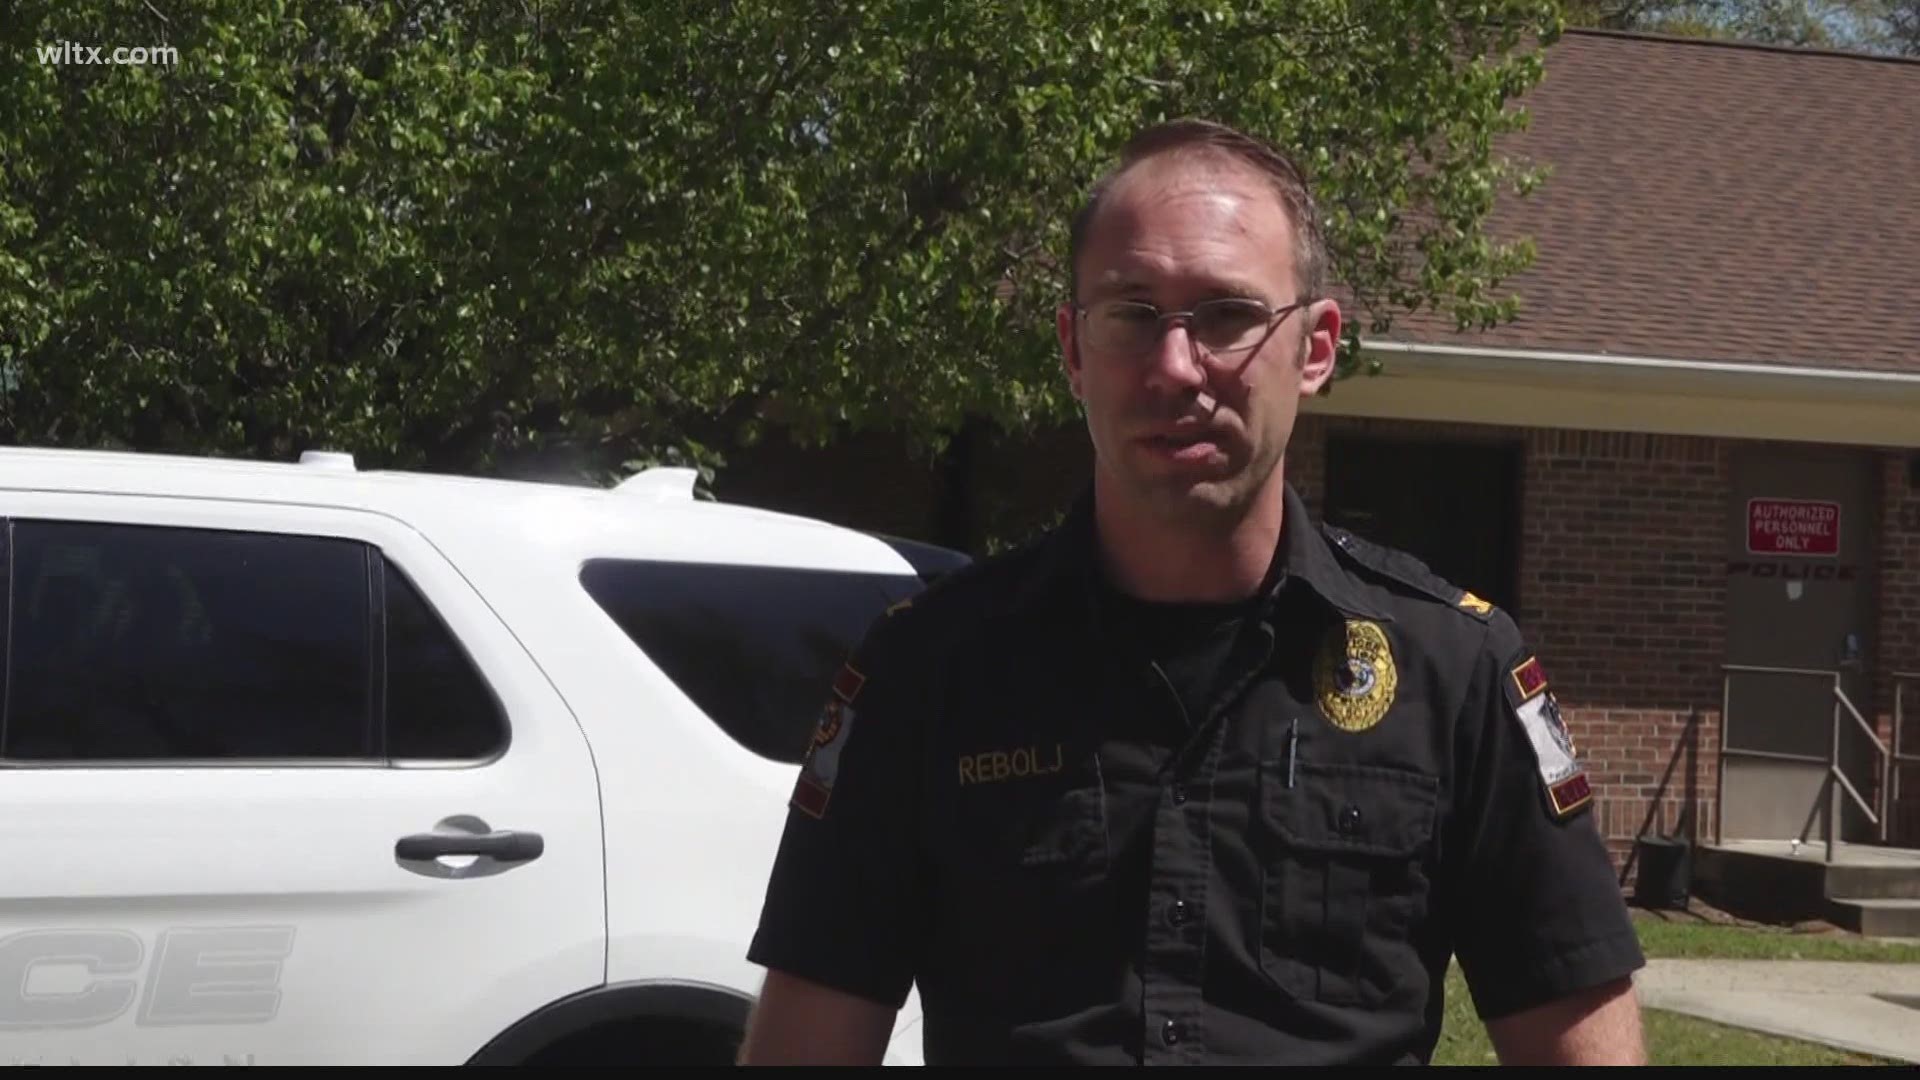 The Town of Pelion Police Department has recently named a new police chief.